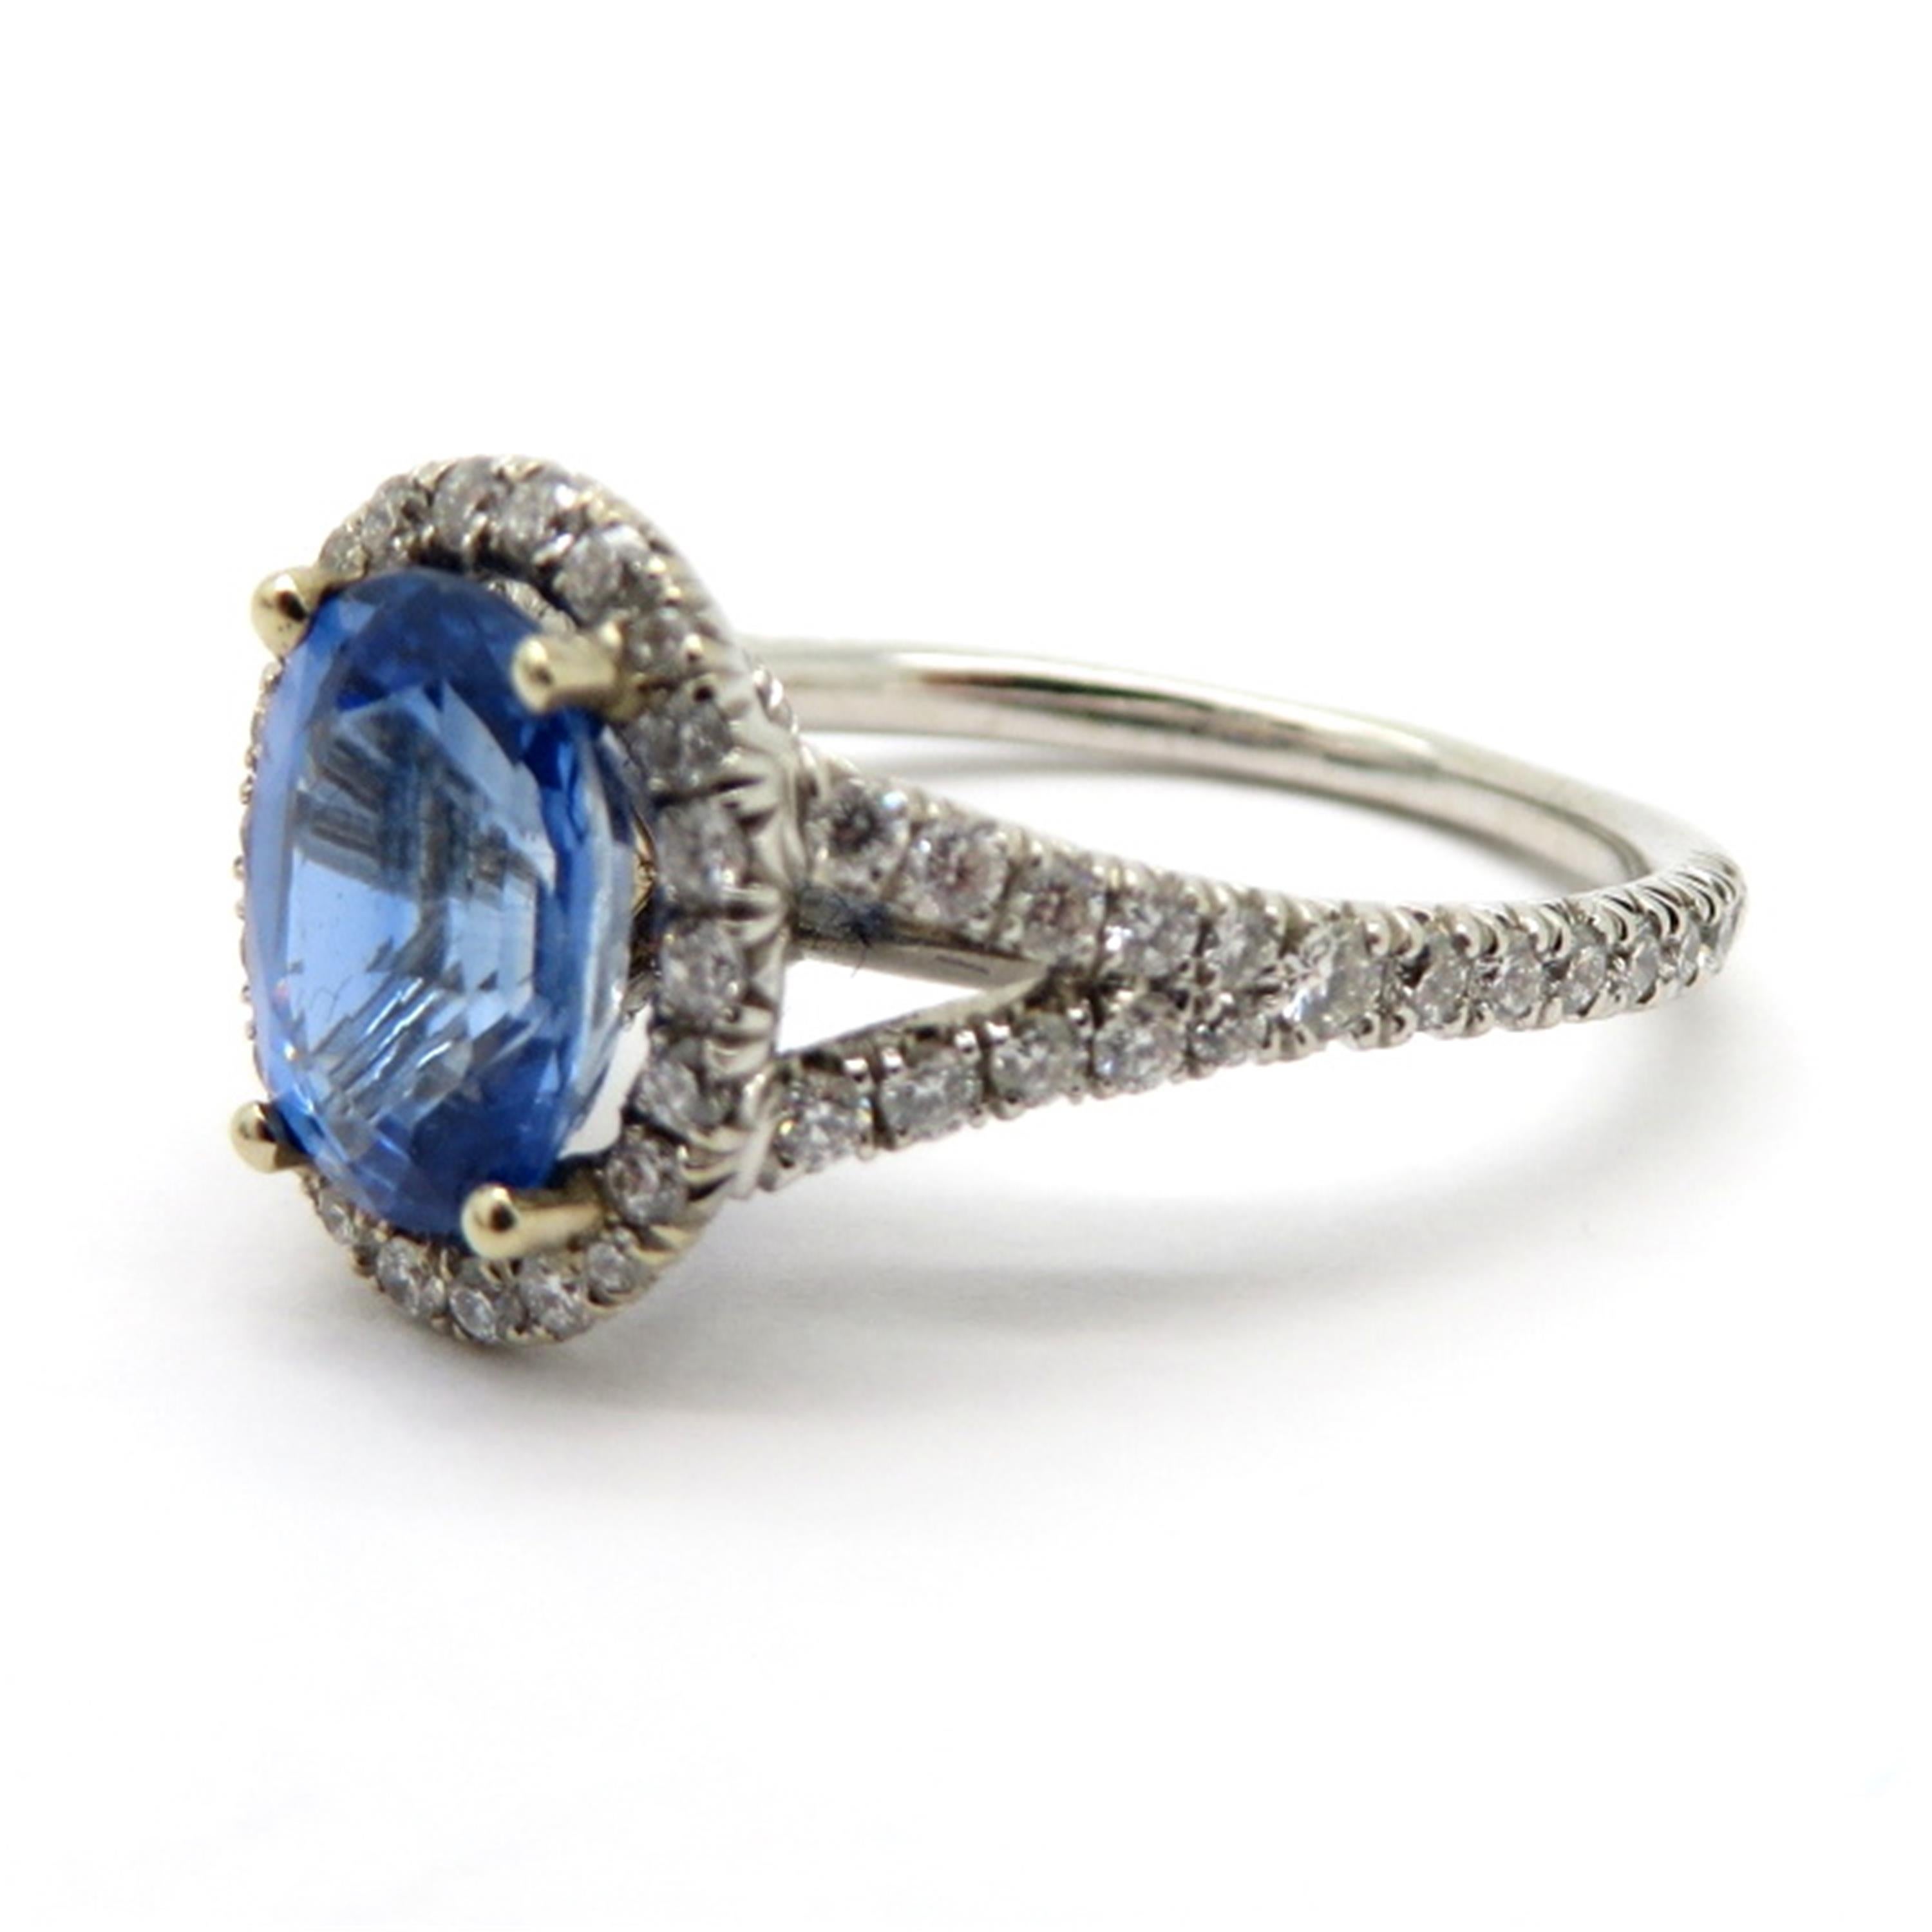 Estate sapphire and diamond 18K white gold halo ring. Centering one oval brilliant cut ceylon blue sapphire weighing approximately 1.47 carats. Interspersed with 74 round brilliant cut diamonds weighing a combined total of approximately 0.50 carats.